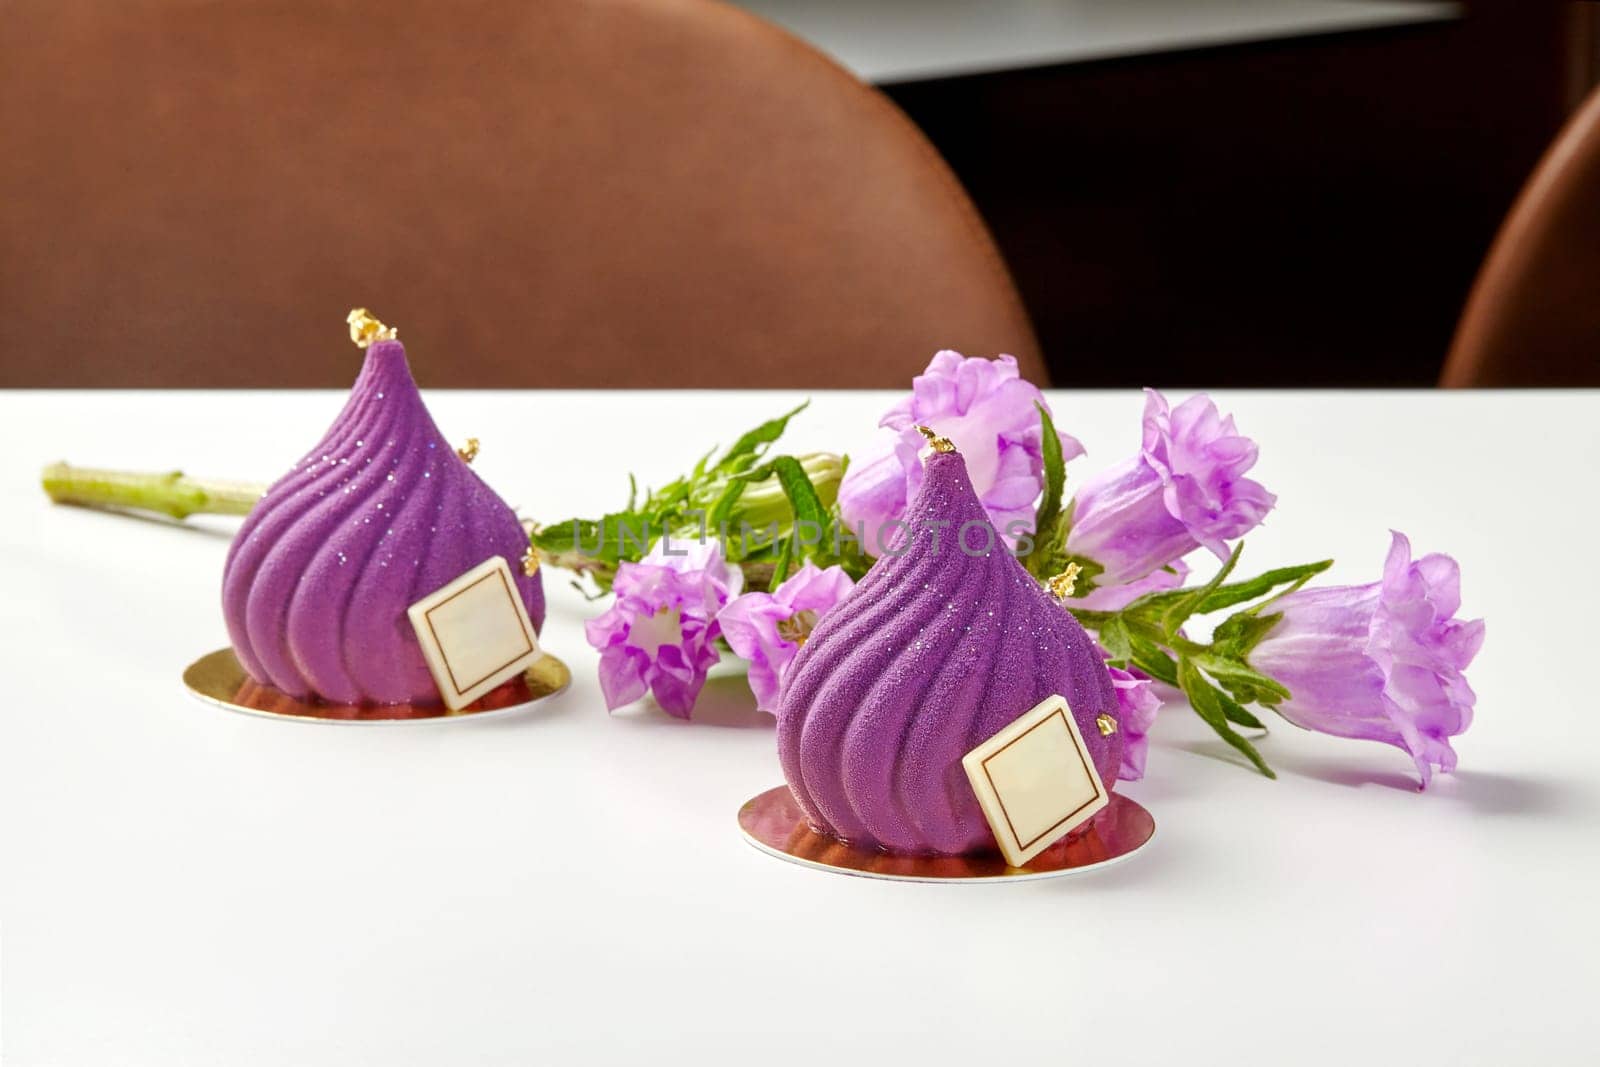 Luxurious purple mousse desserts with gold leaf and flowers by nazarovsergey